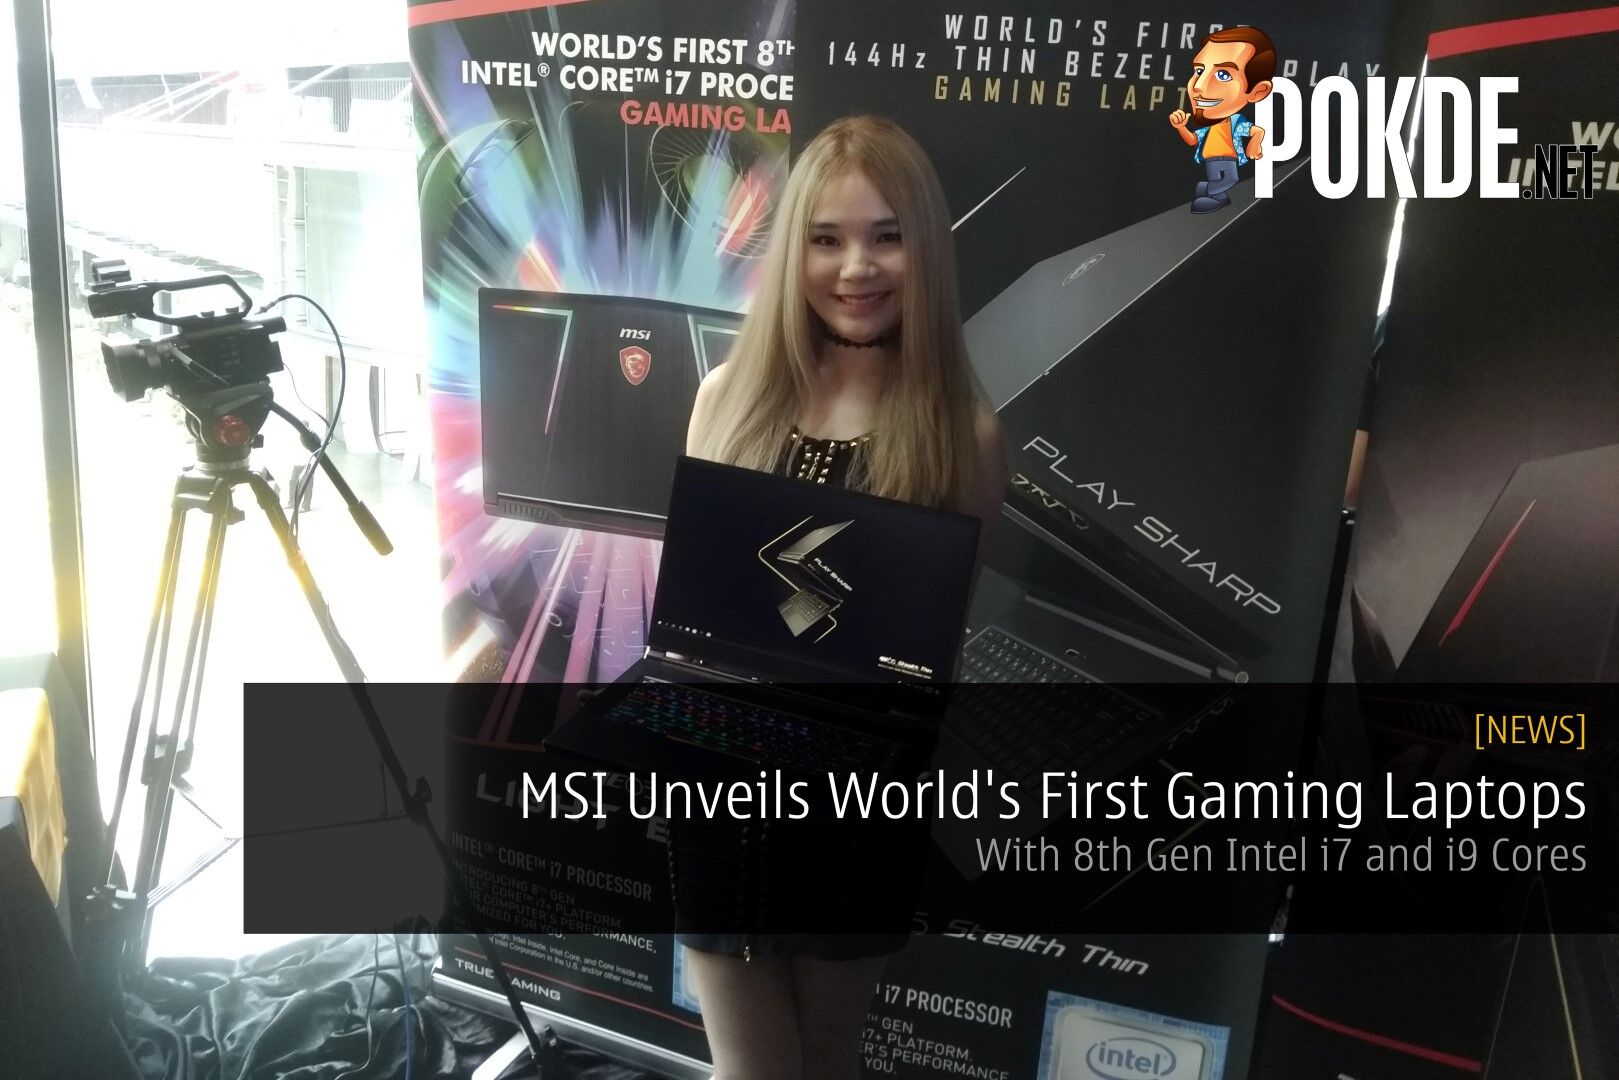 MSI Unveils World's First Gaming Laptops With 8th Gen Intel i7 and i9 Cores 25